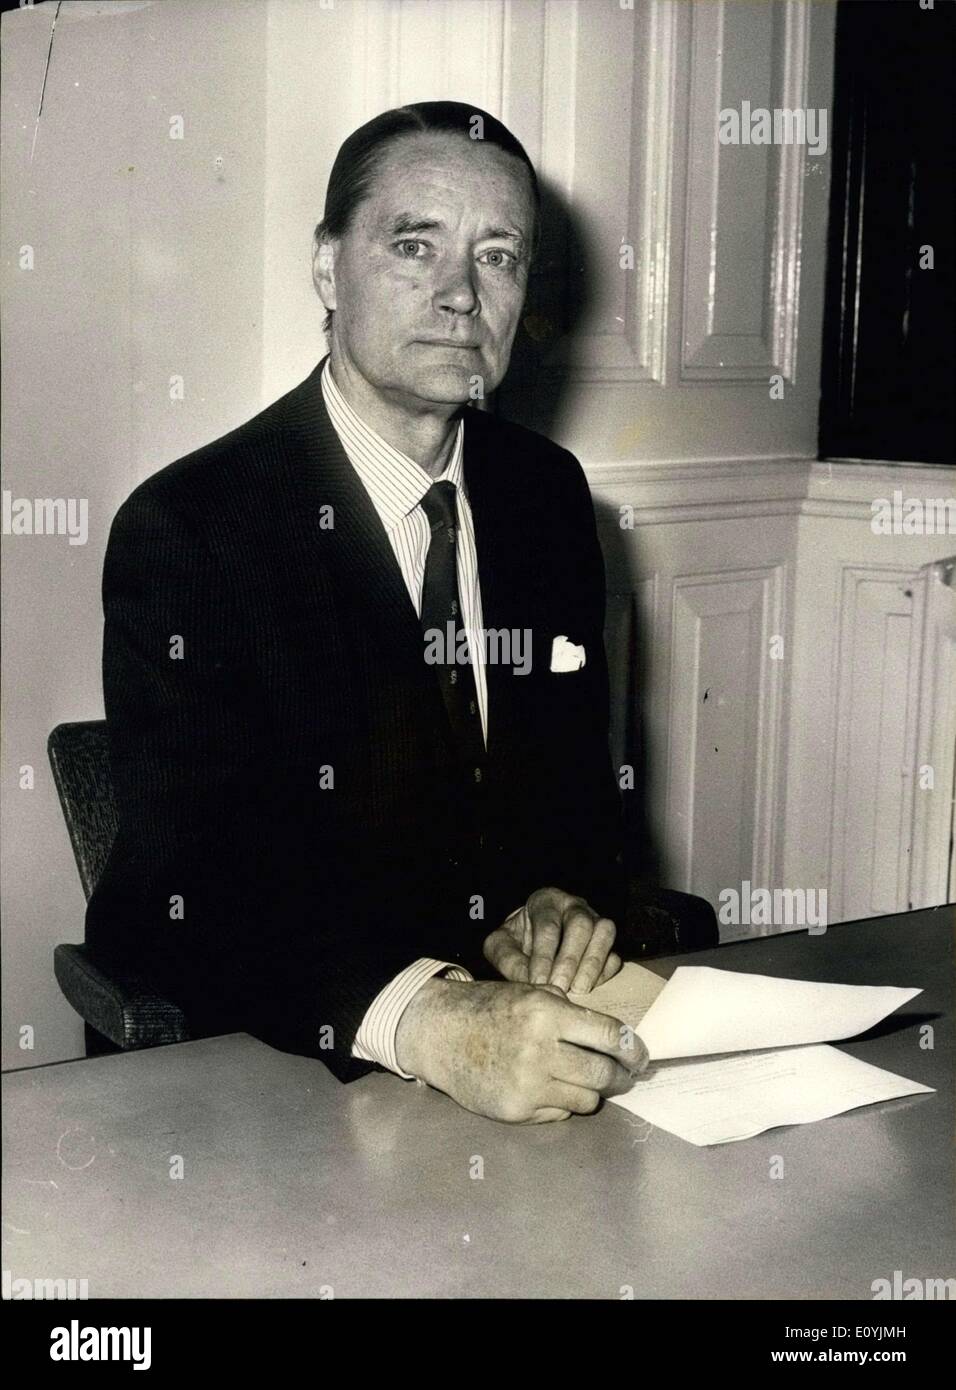 Jul. 14, 1970 - Ambassador-Designate At tananarive. Mr. T.L. Crosthwait; Photo Shows Mr. T.L. Crosthwait, Ambassador-designate at Tananarive, Malagasy Republic -pictured today at the Foreign and Commonwealth Office, London. Stock Photo